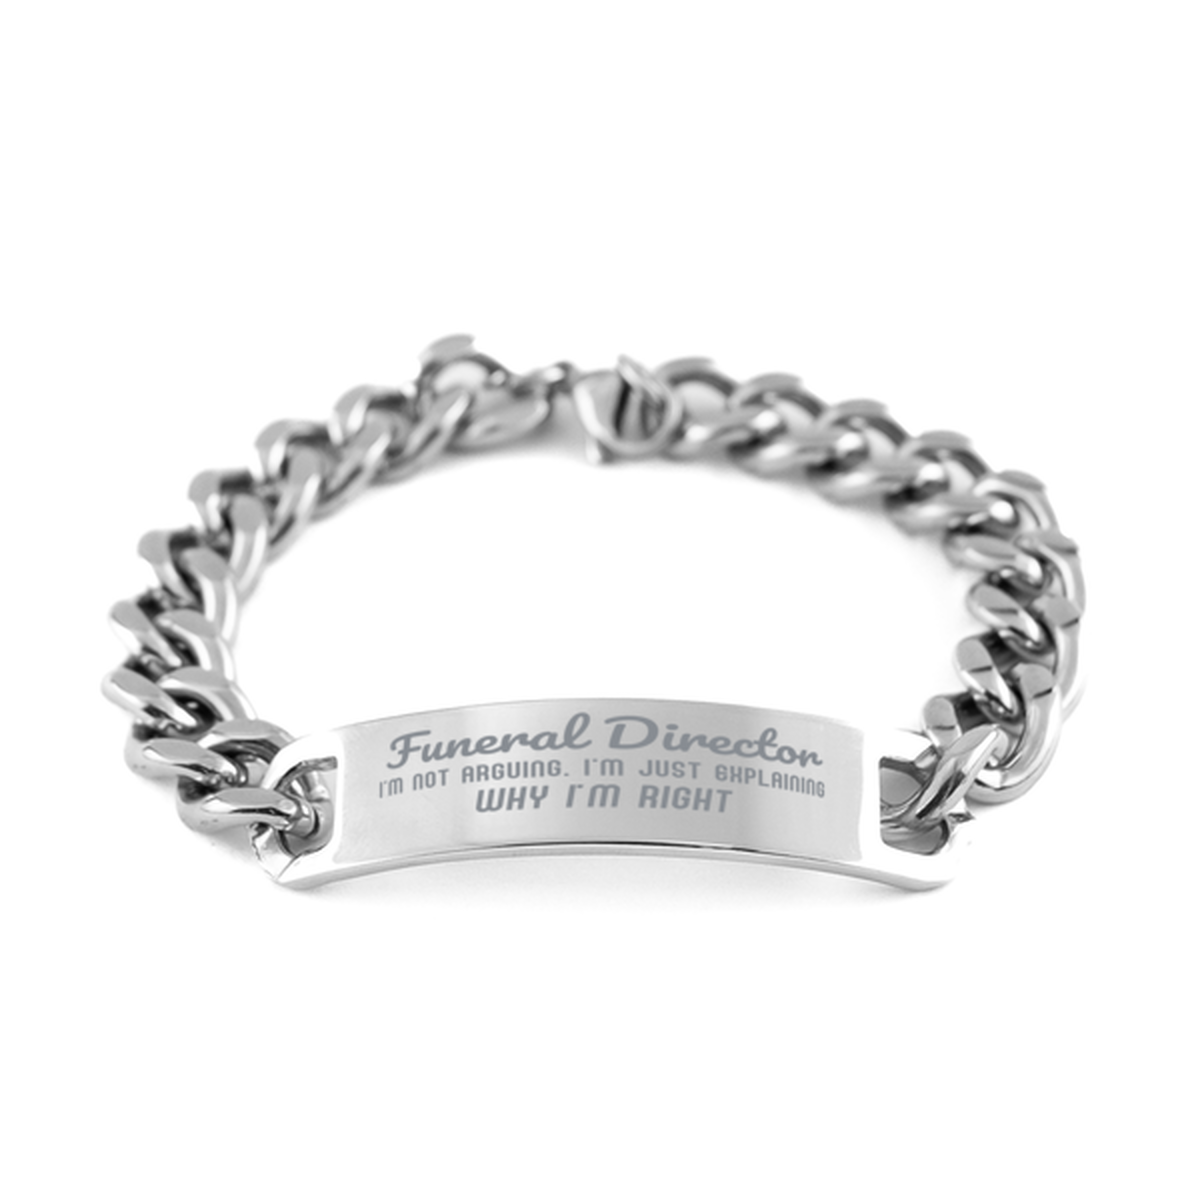 Funeral Director I'm not Arguing. I'm Just Explaining Why I'm RIGHT Cuban Chain Stainless Steel Bracelet, Graduation Birthday Christmas Funeral Director Gifts For Funeral Director Funny Saying Quote Present for Men Women Coworker